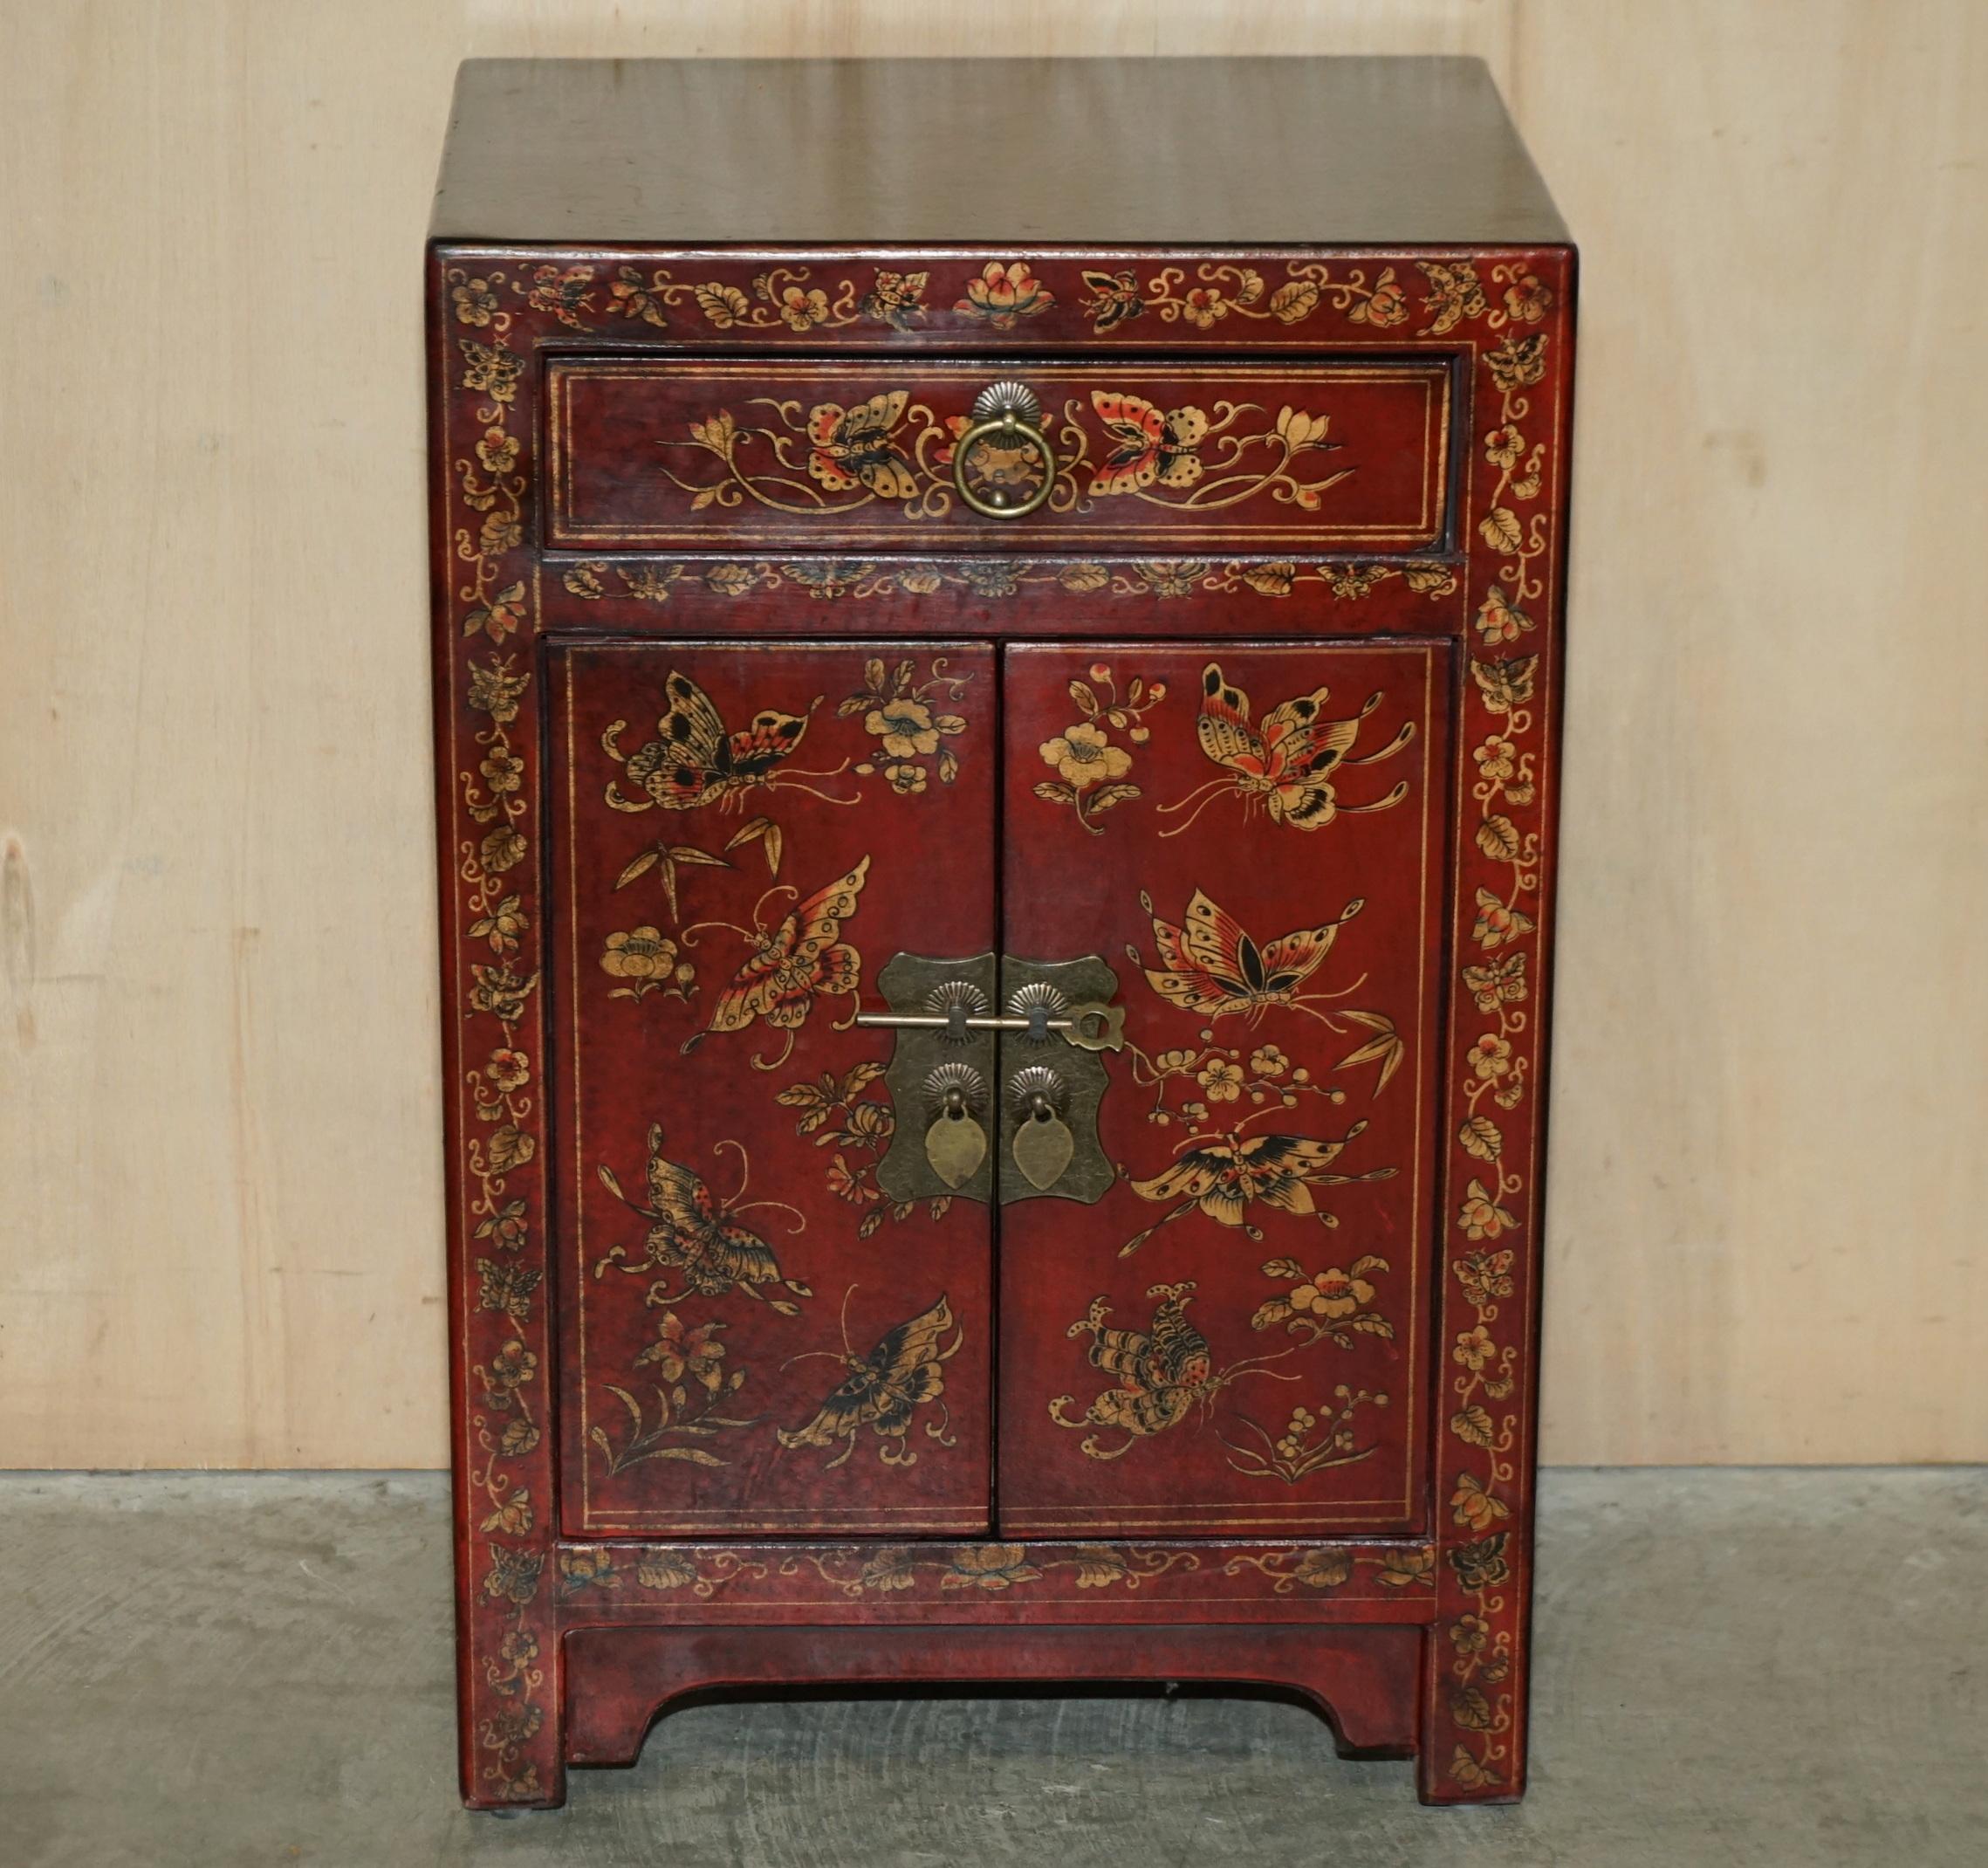 We are delighted to offer for sale this lovely vintage circa 1920's hand painted and lacquered Chinese Wedding cupboard for folded linens etc.

A very good looking and well made piece, these are now highly collectable as art furniture. This was